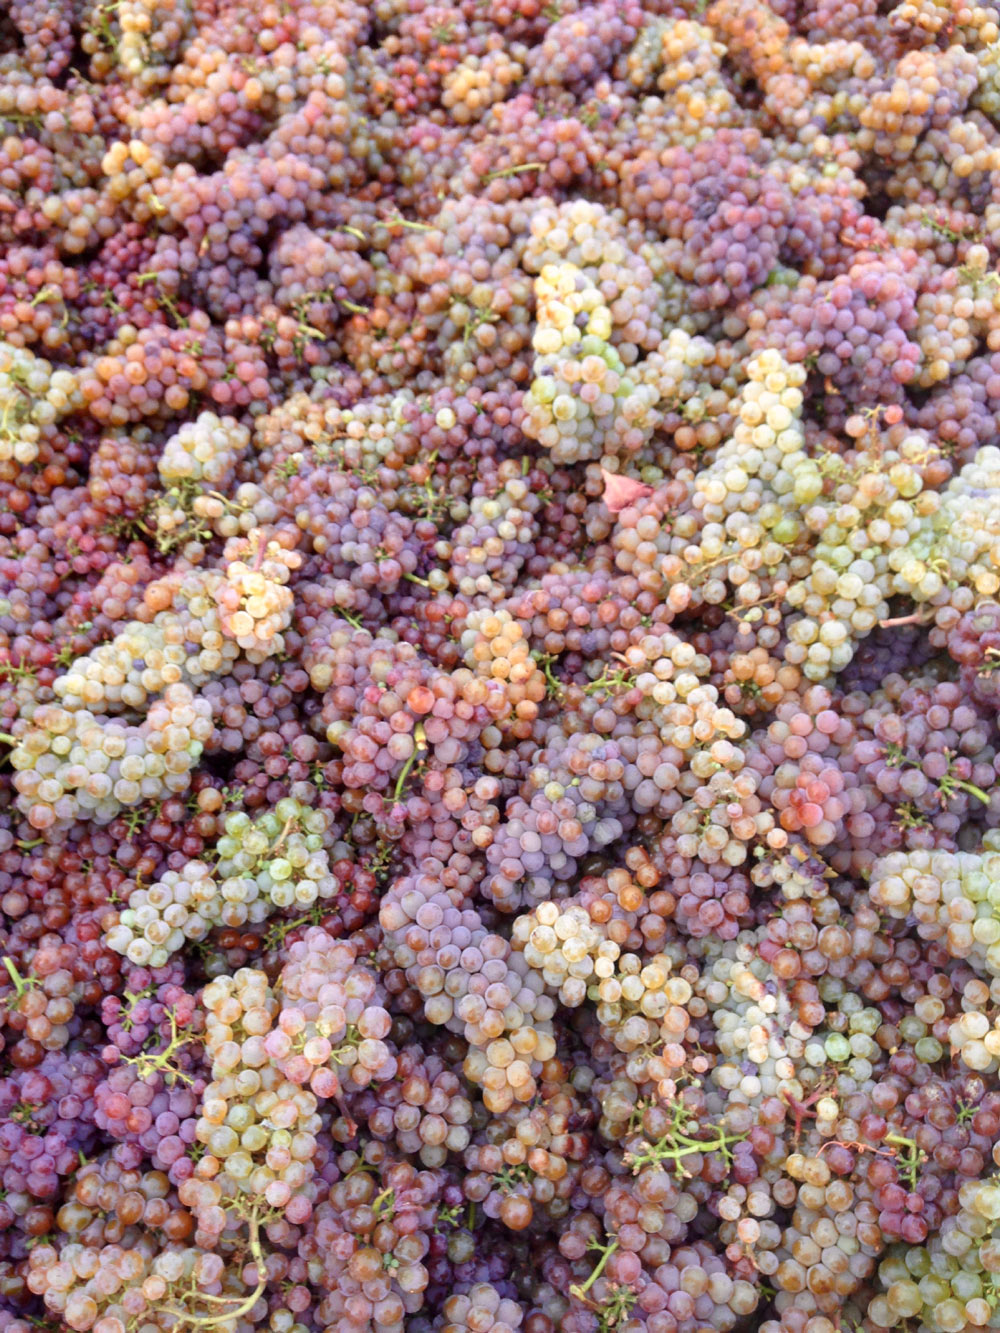 The colorful grapes from Compagni Portis